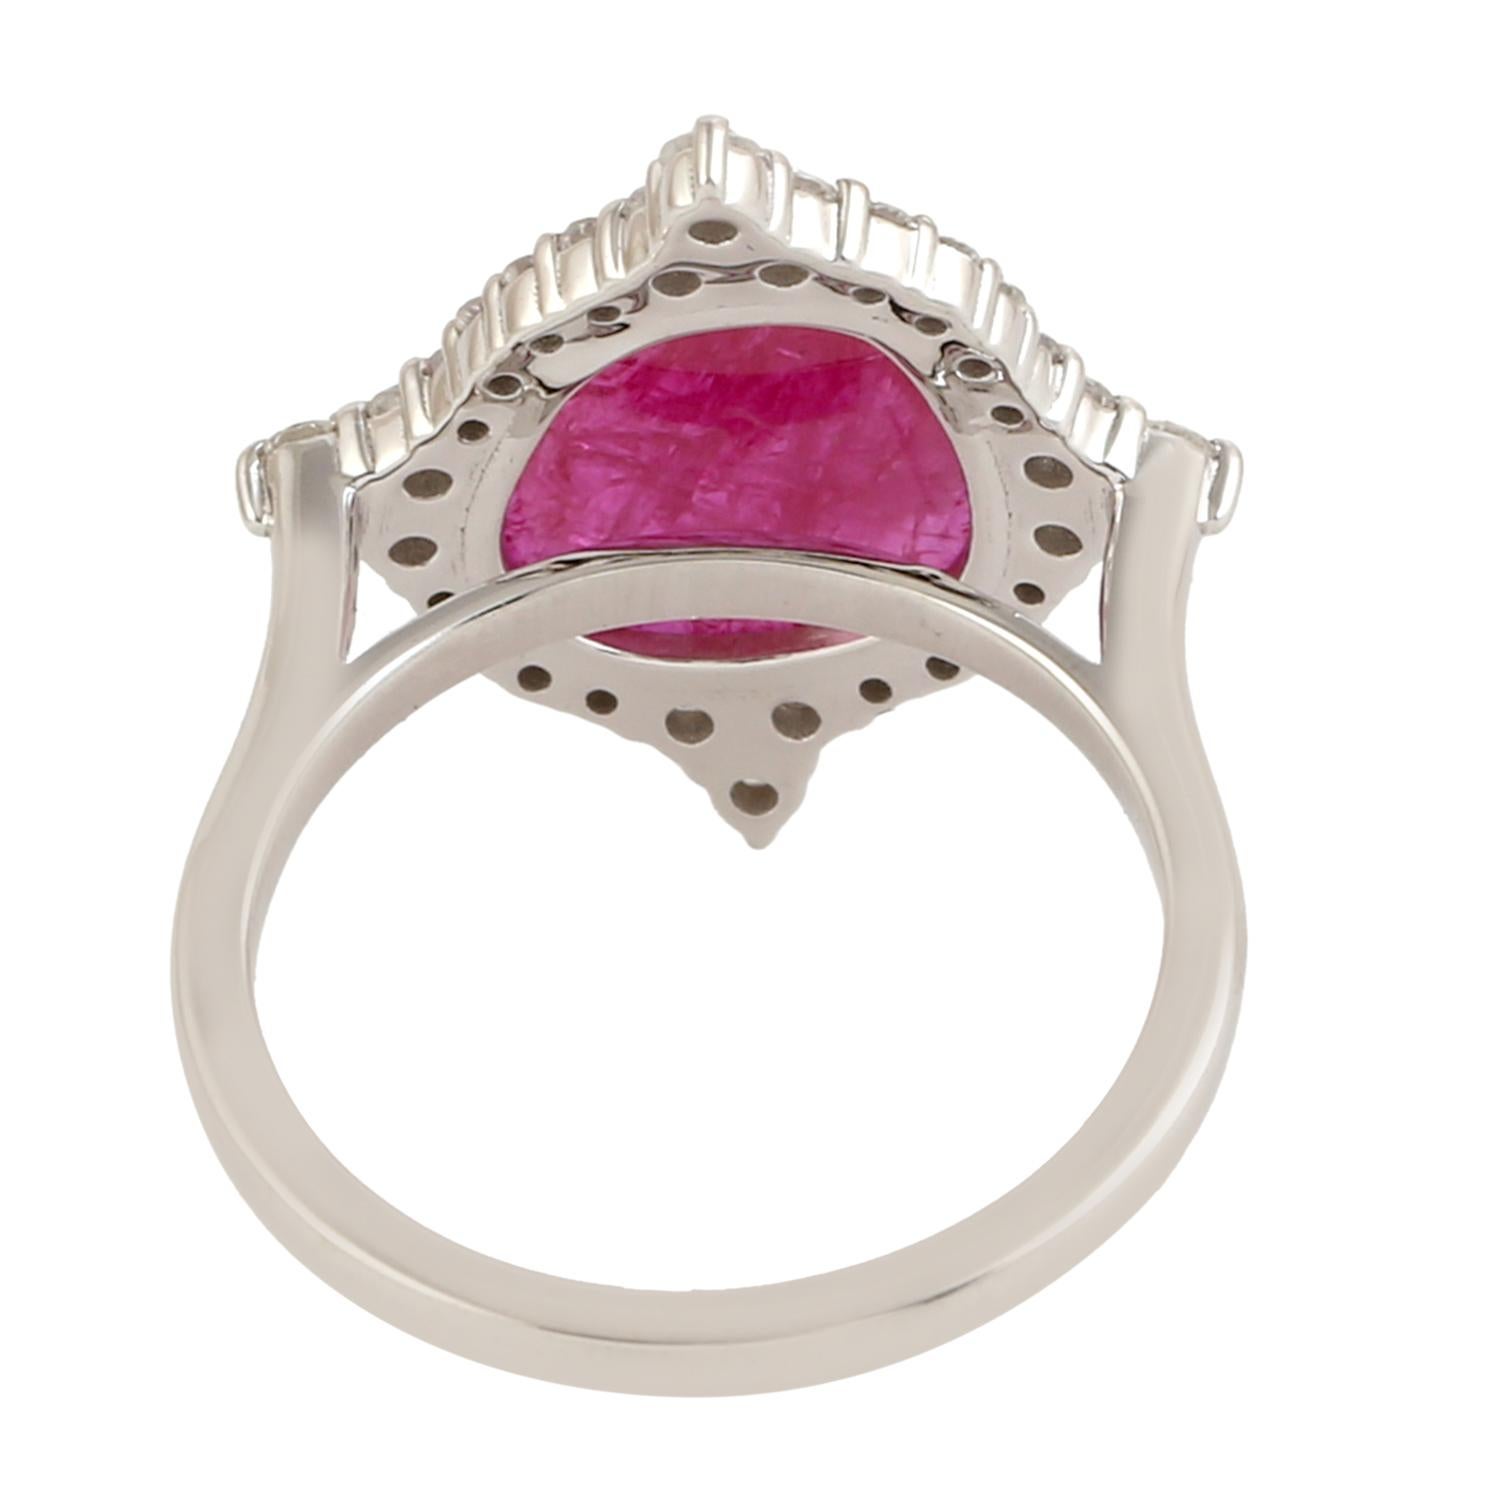 Art Deco Ruby Cocktail Ring With Diamonds Made In 18k White Gold For Sale